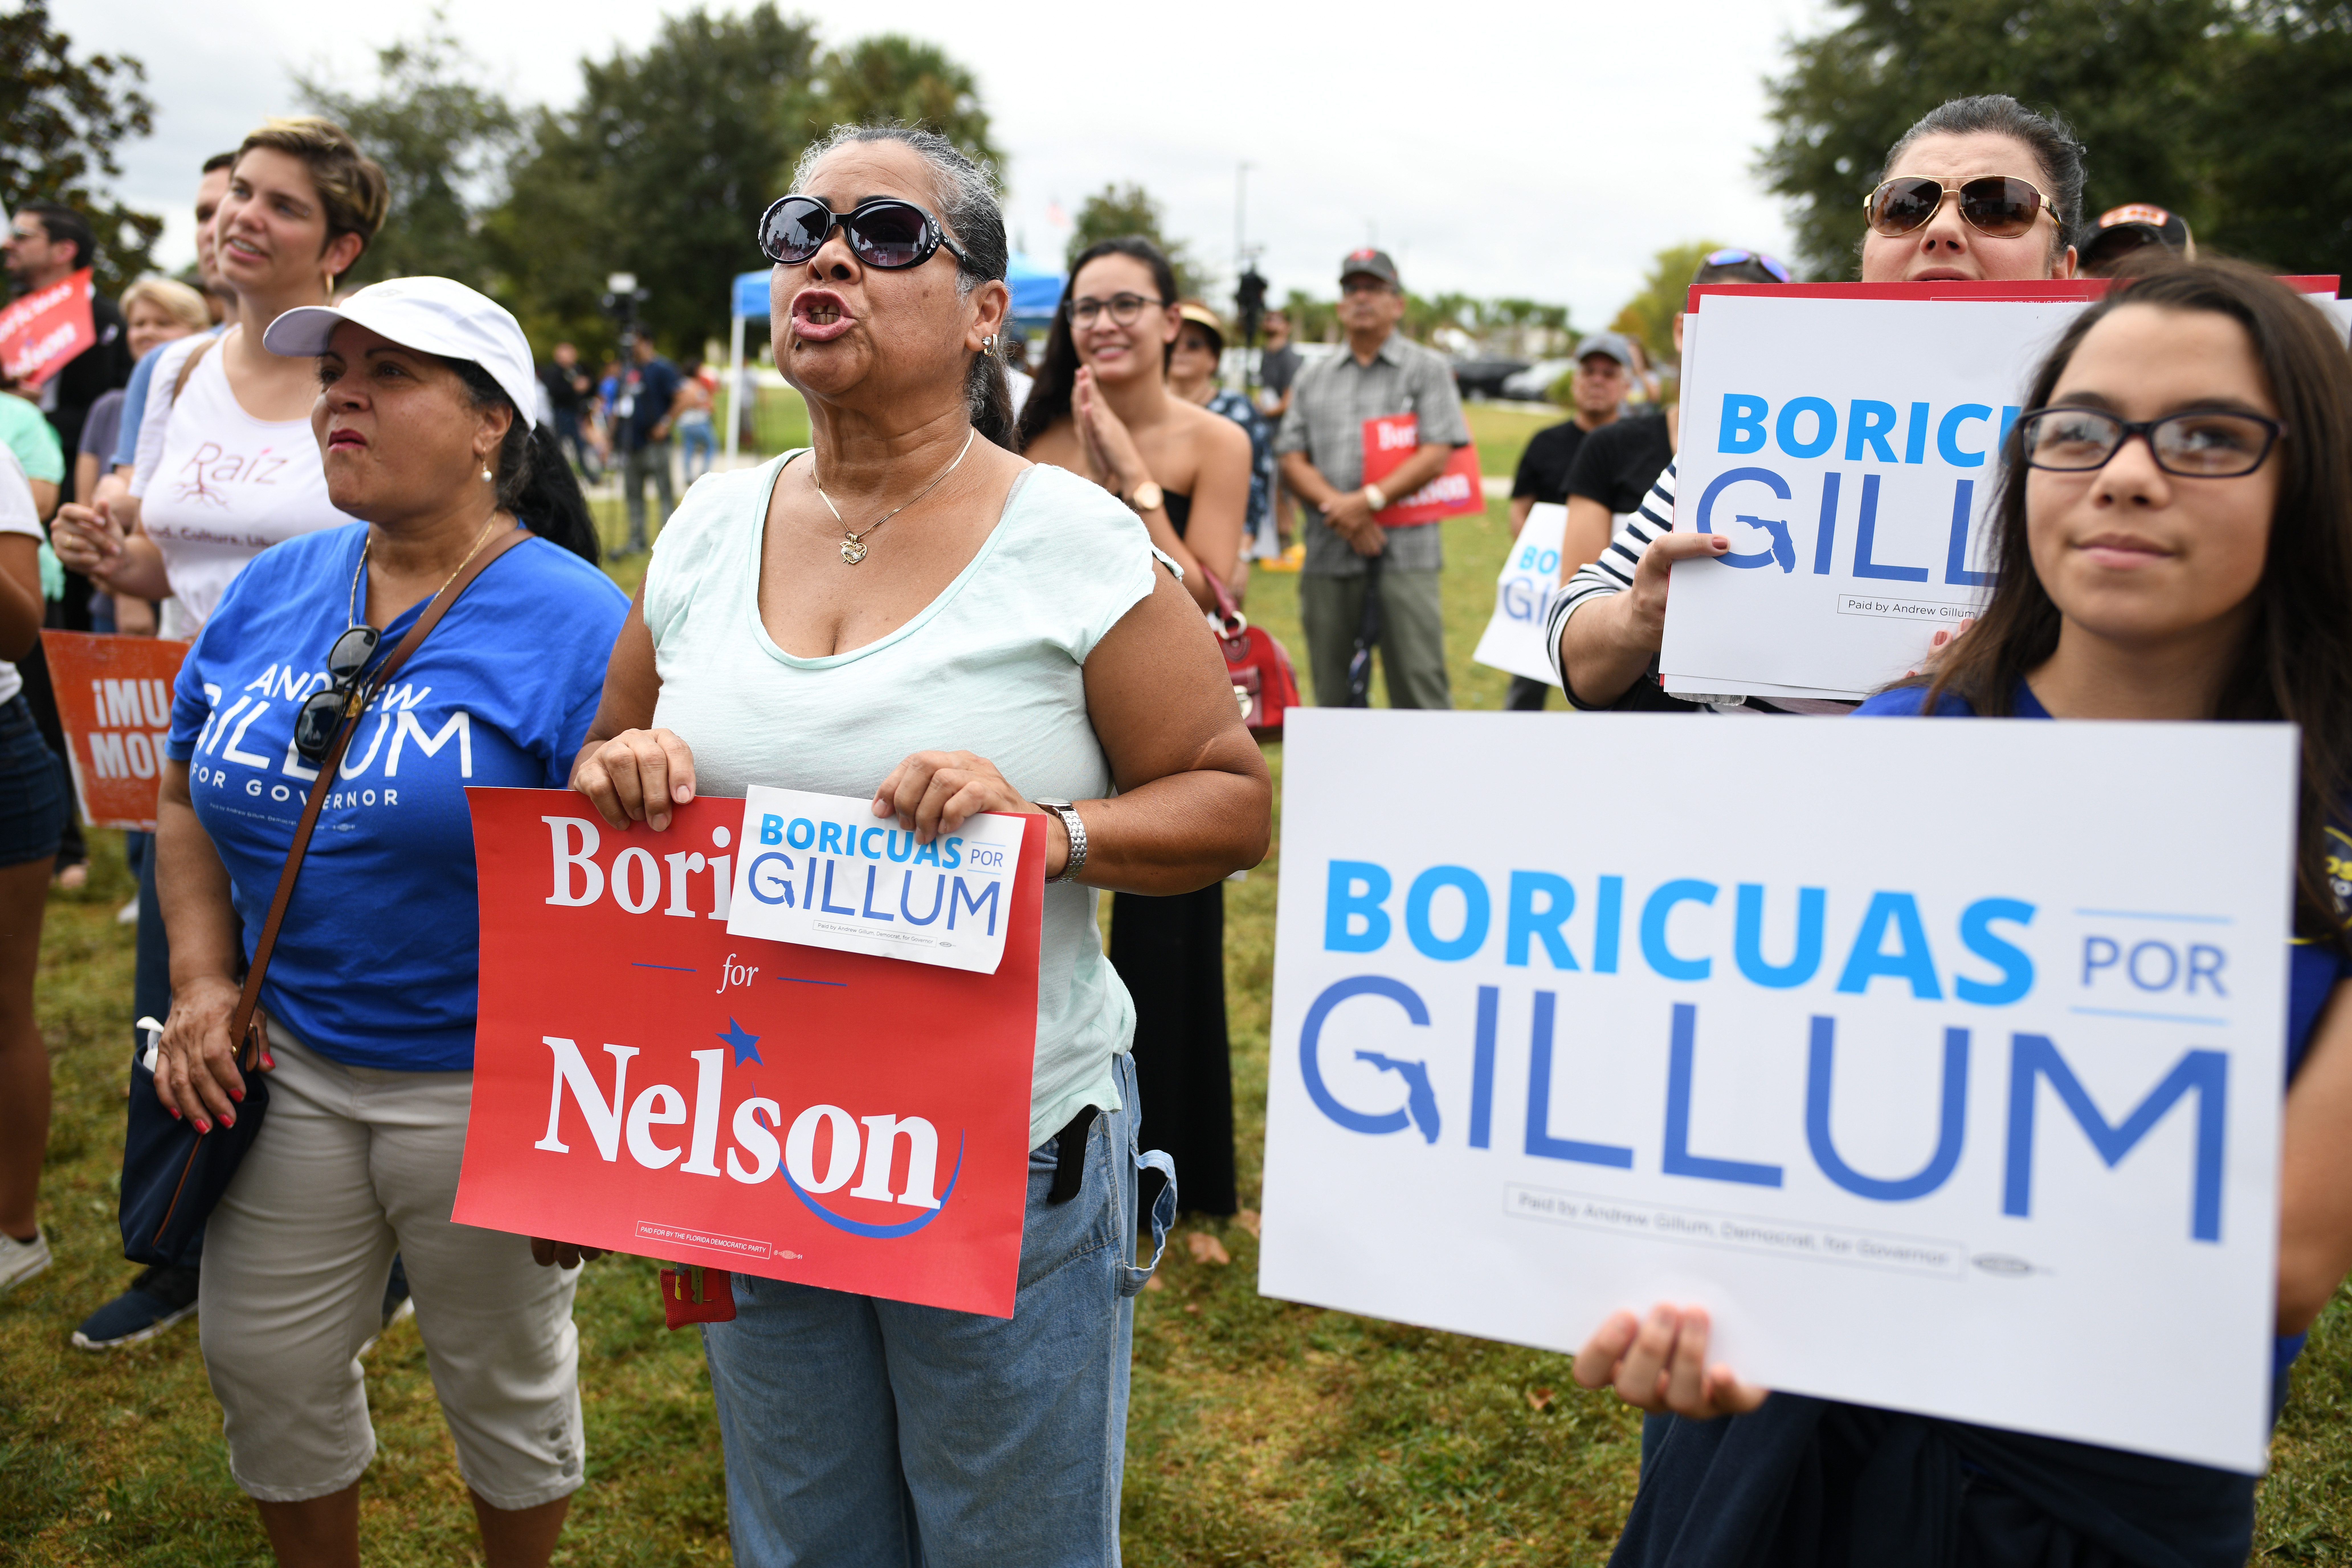 Florida Democratic Candidates And Supporters Hold March To The Polls In Kissimmee